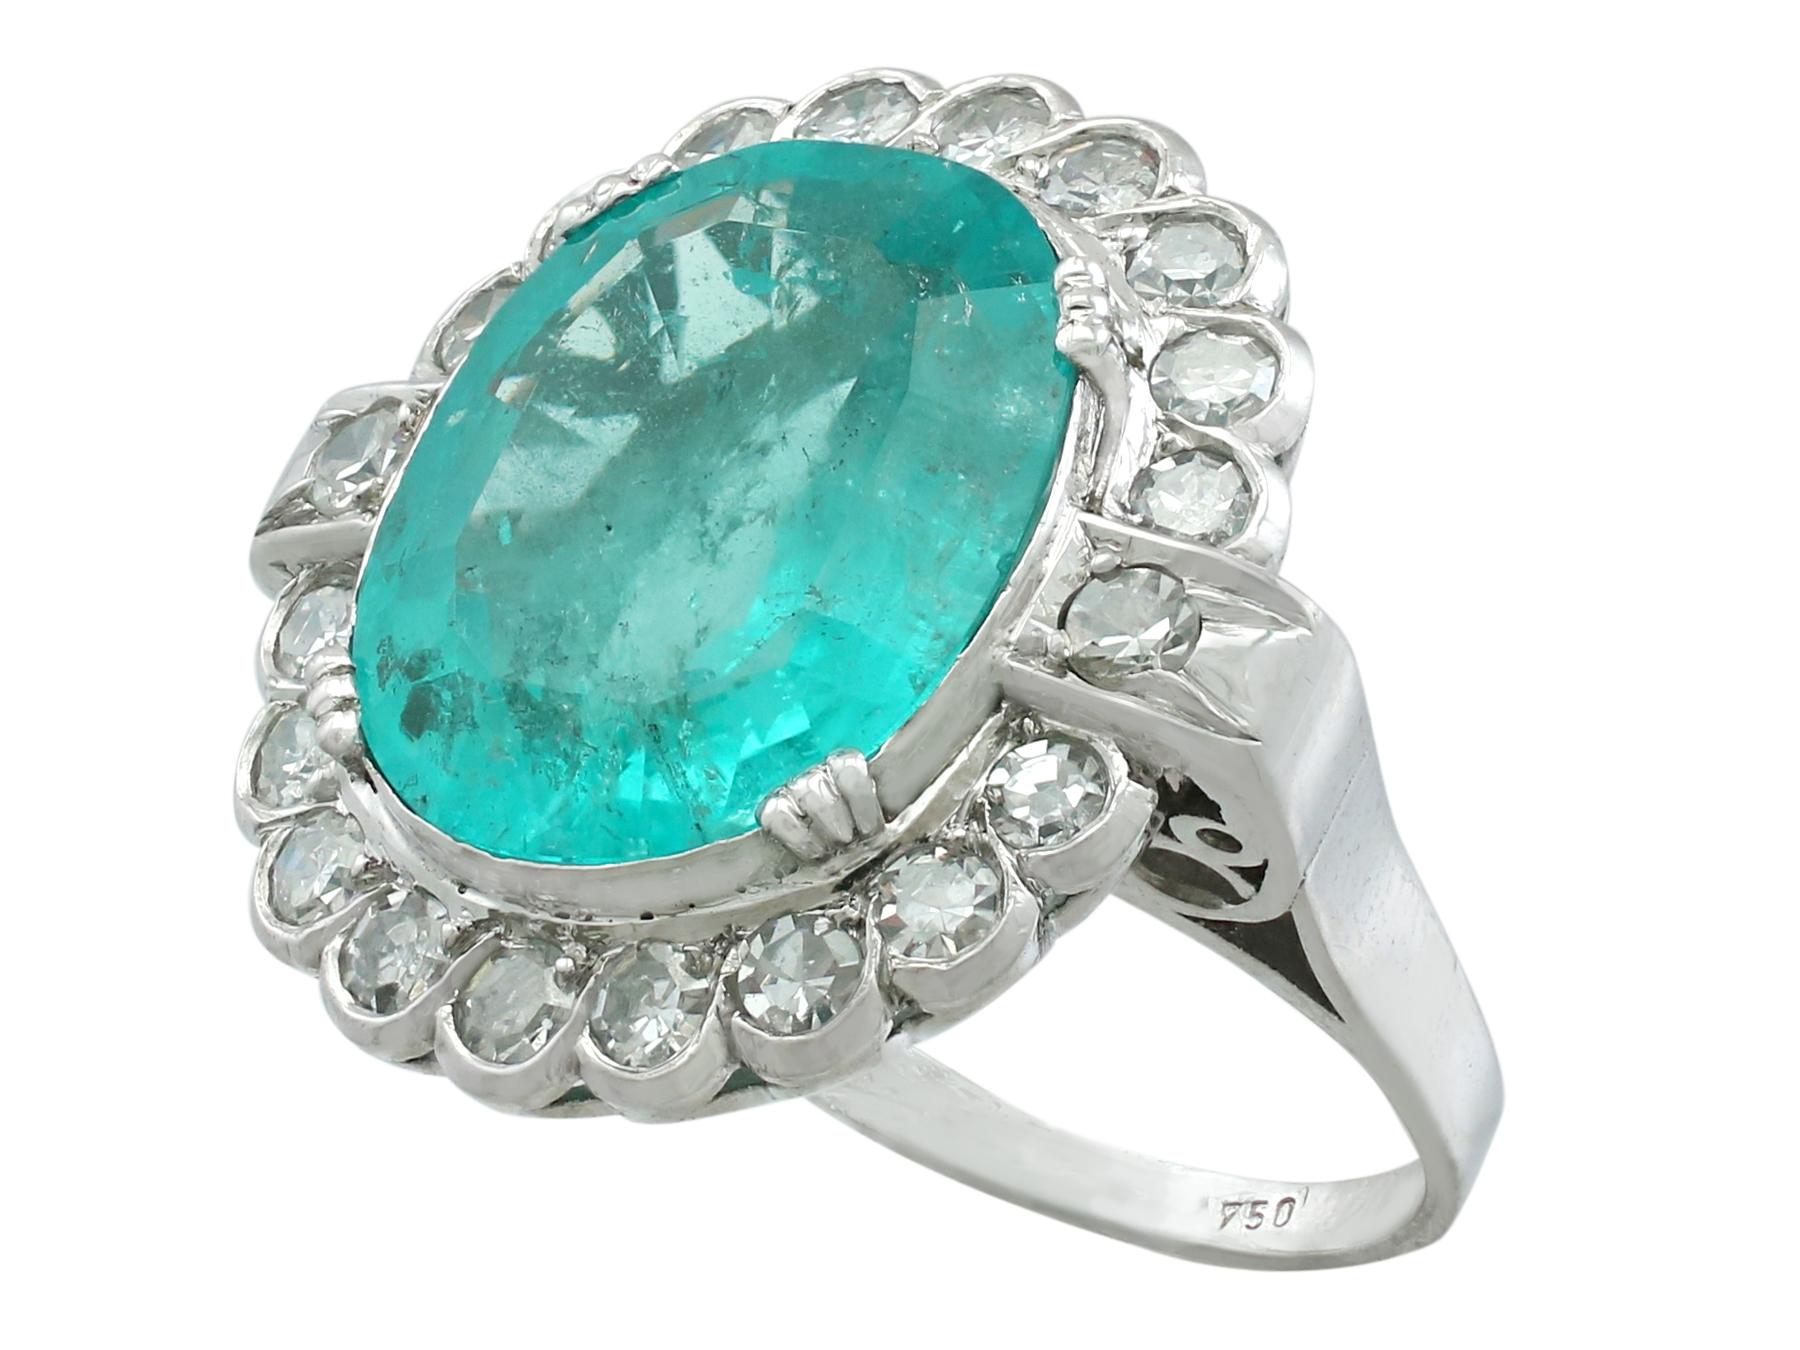 Women's 1950s 8.19 Carat Emerald and 1.48 Carat Diamond White Gold Cocktail Ring